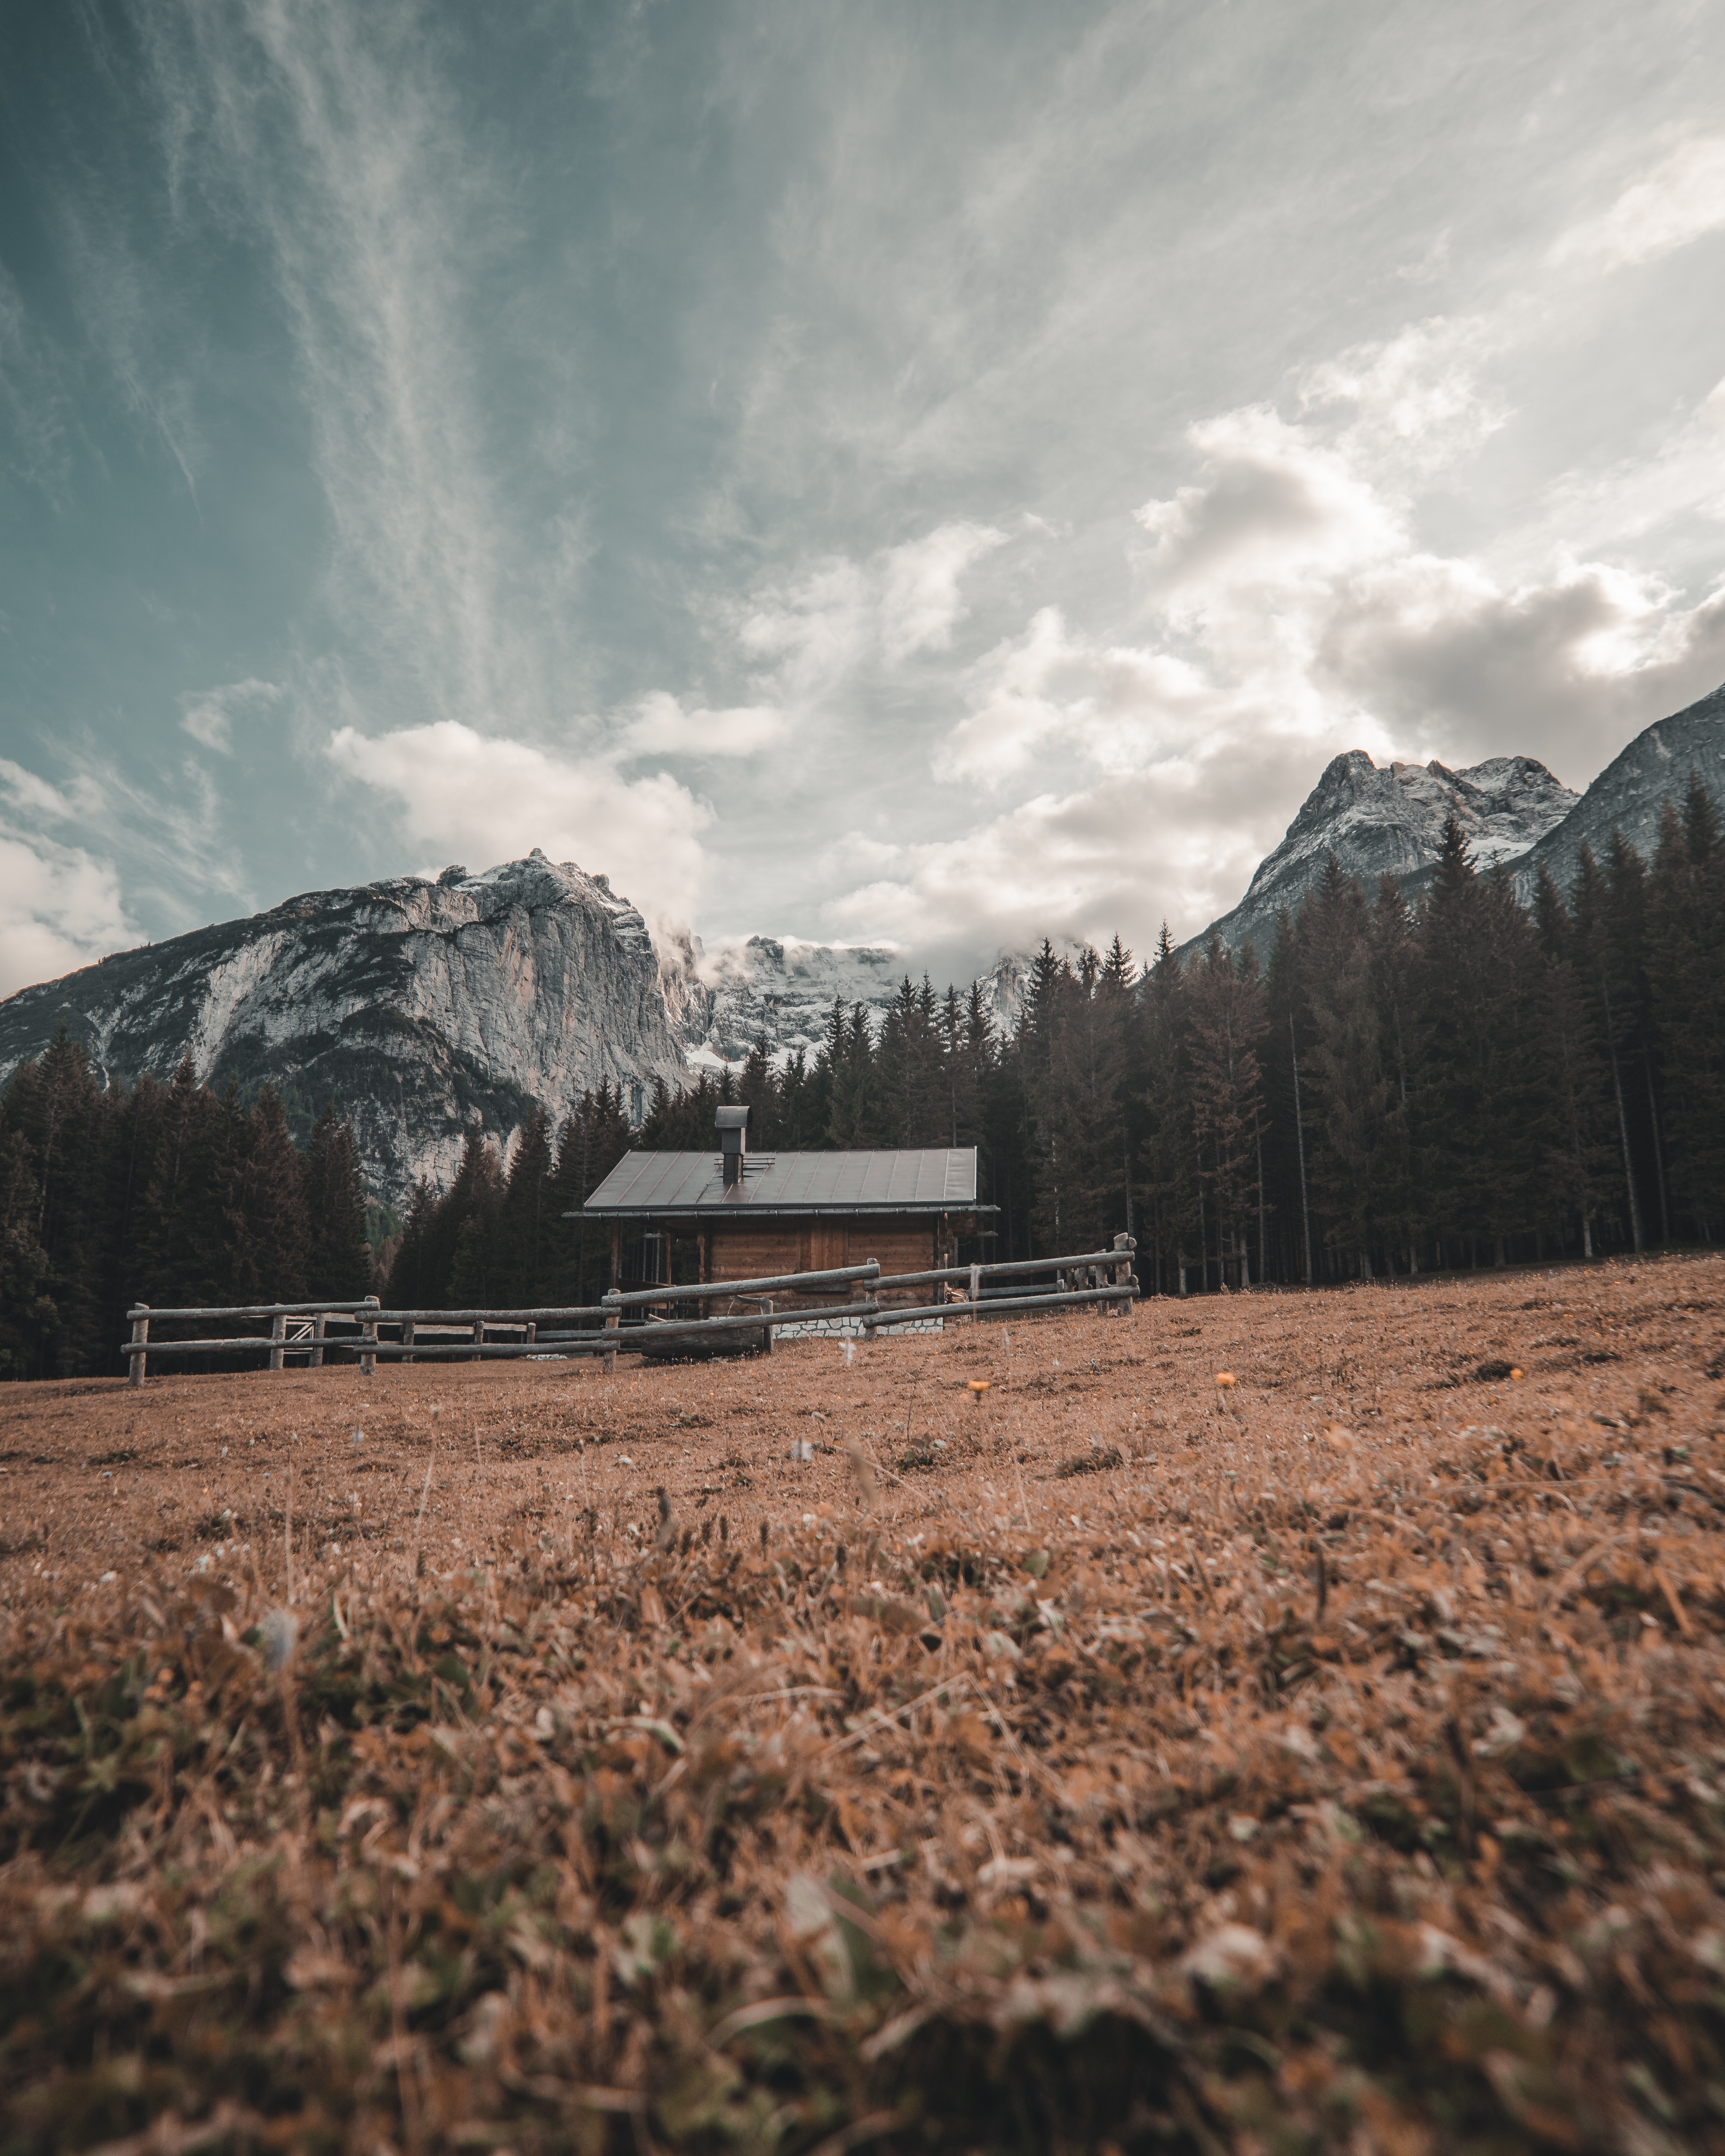 mountains, italy, nature, privacy, seclusion, small house, lodge, dolomites